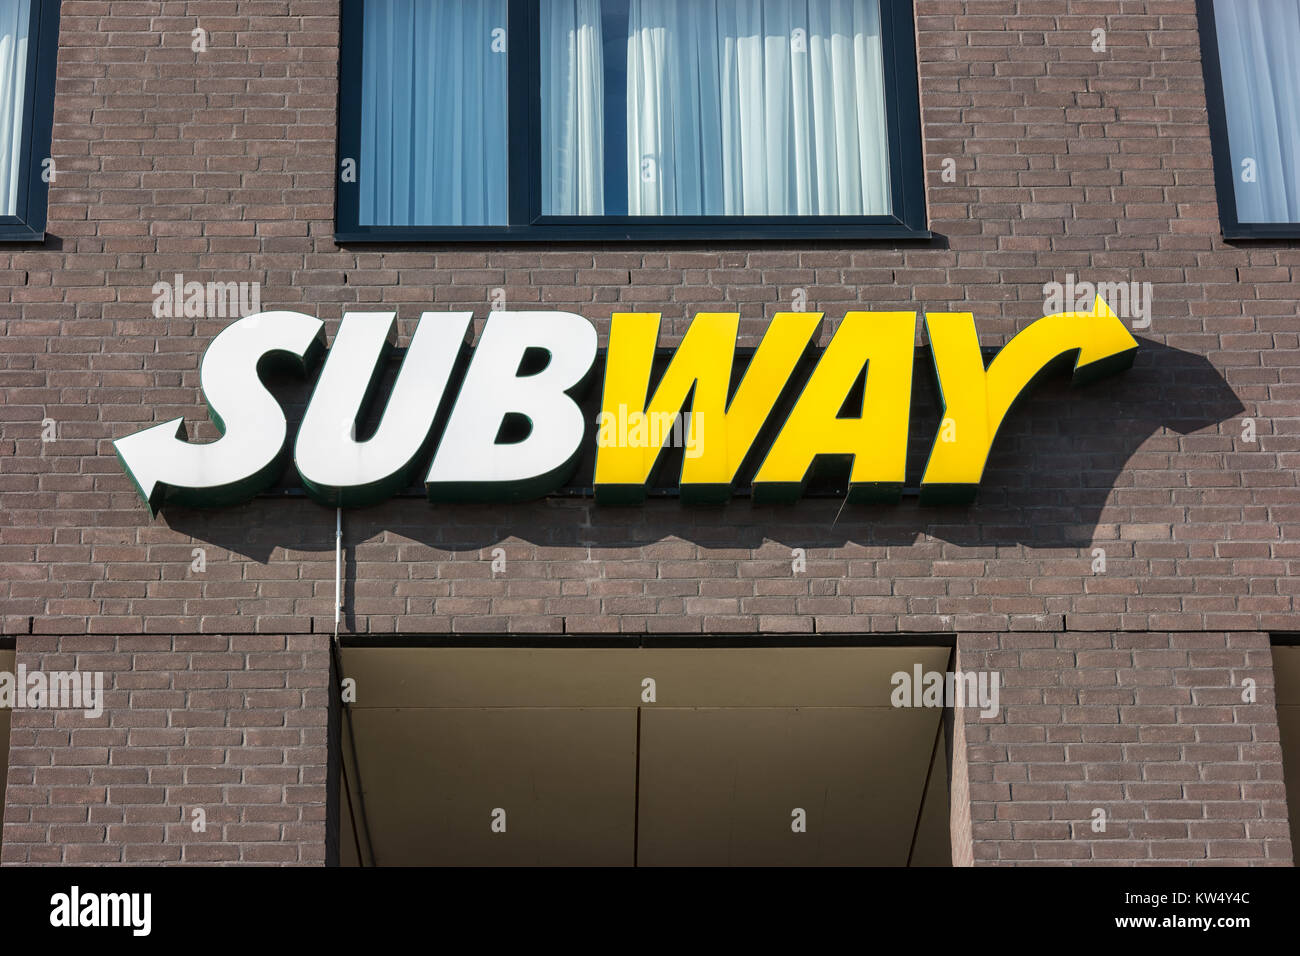 Subway fast food restaurant sign. Subway is an American fast food franchise offering sub sandwiches and salads. Stock Photo